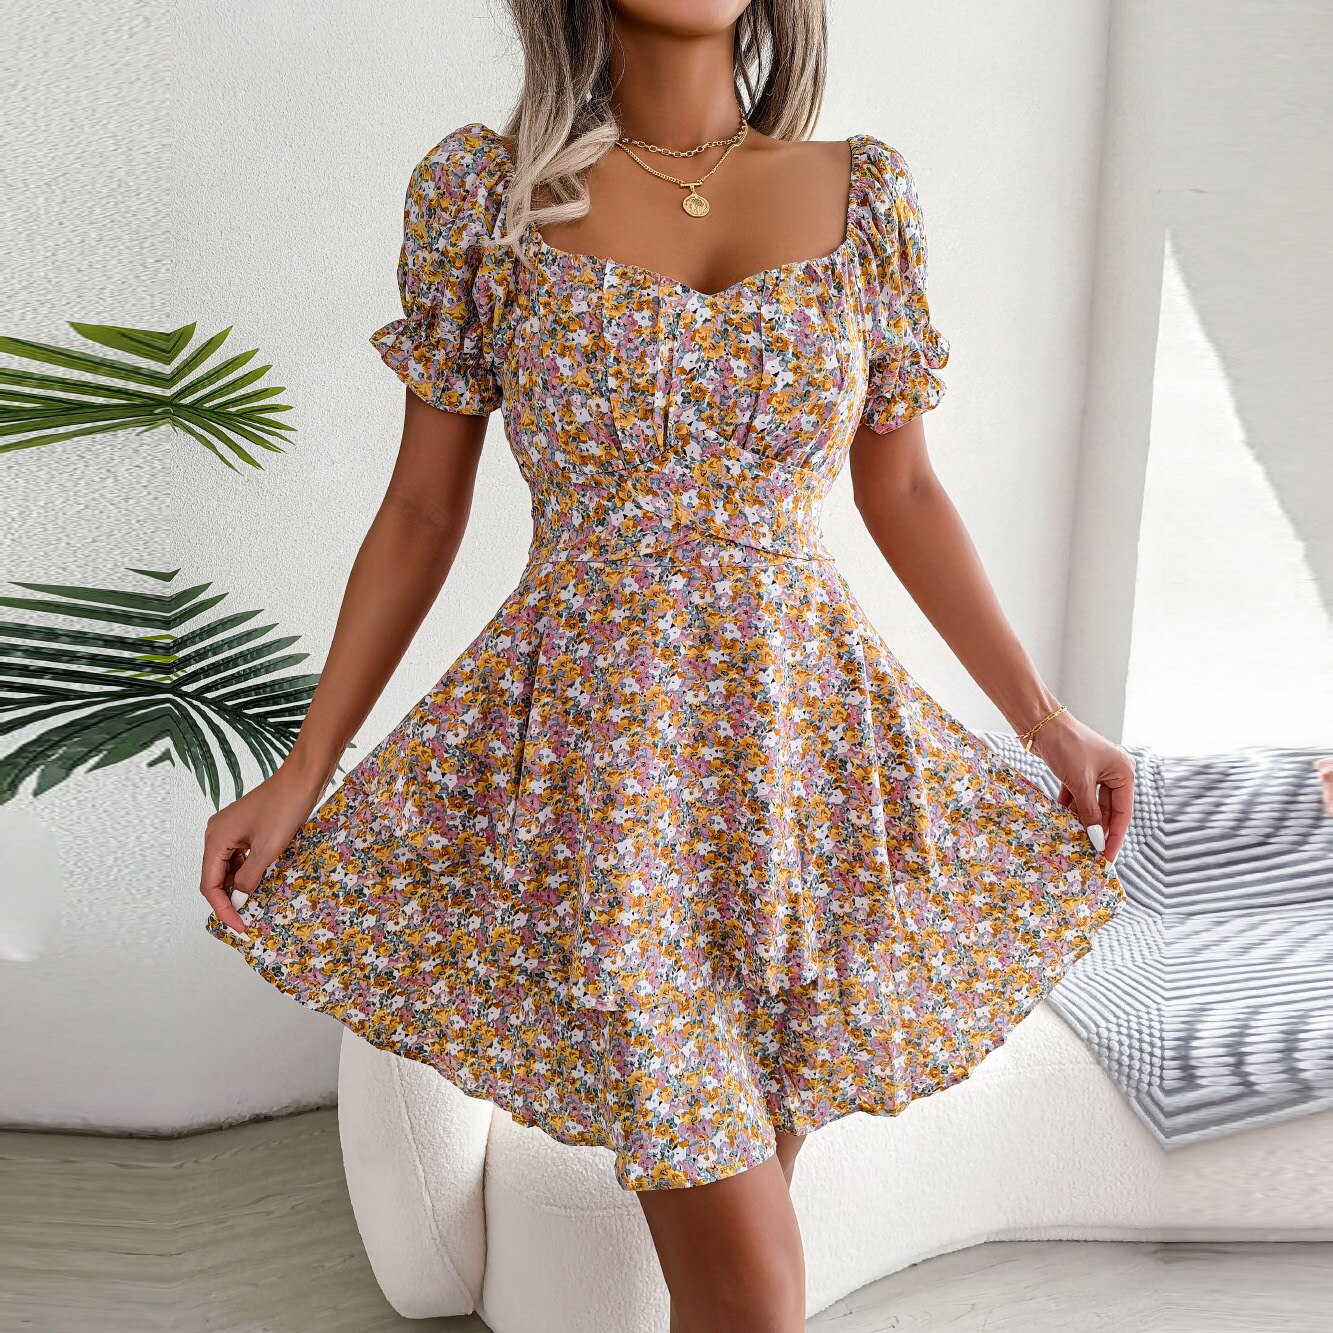 Floral Dress For Fashion